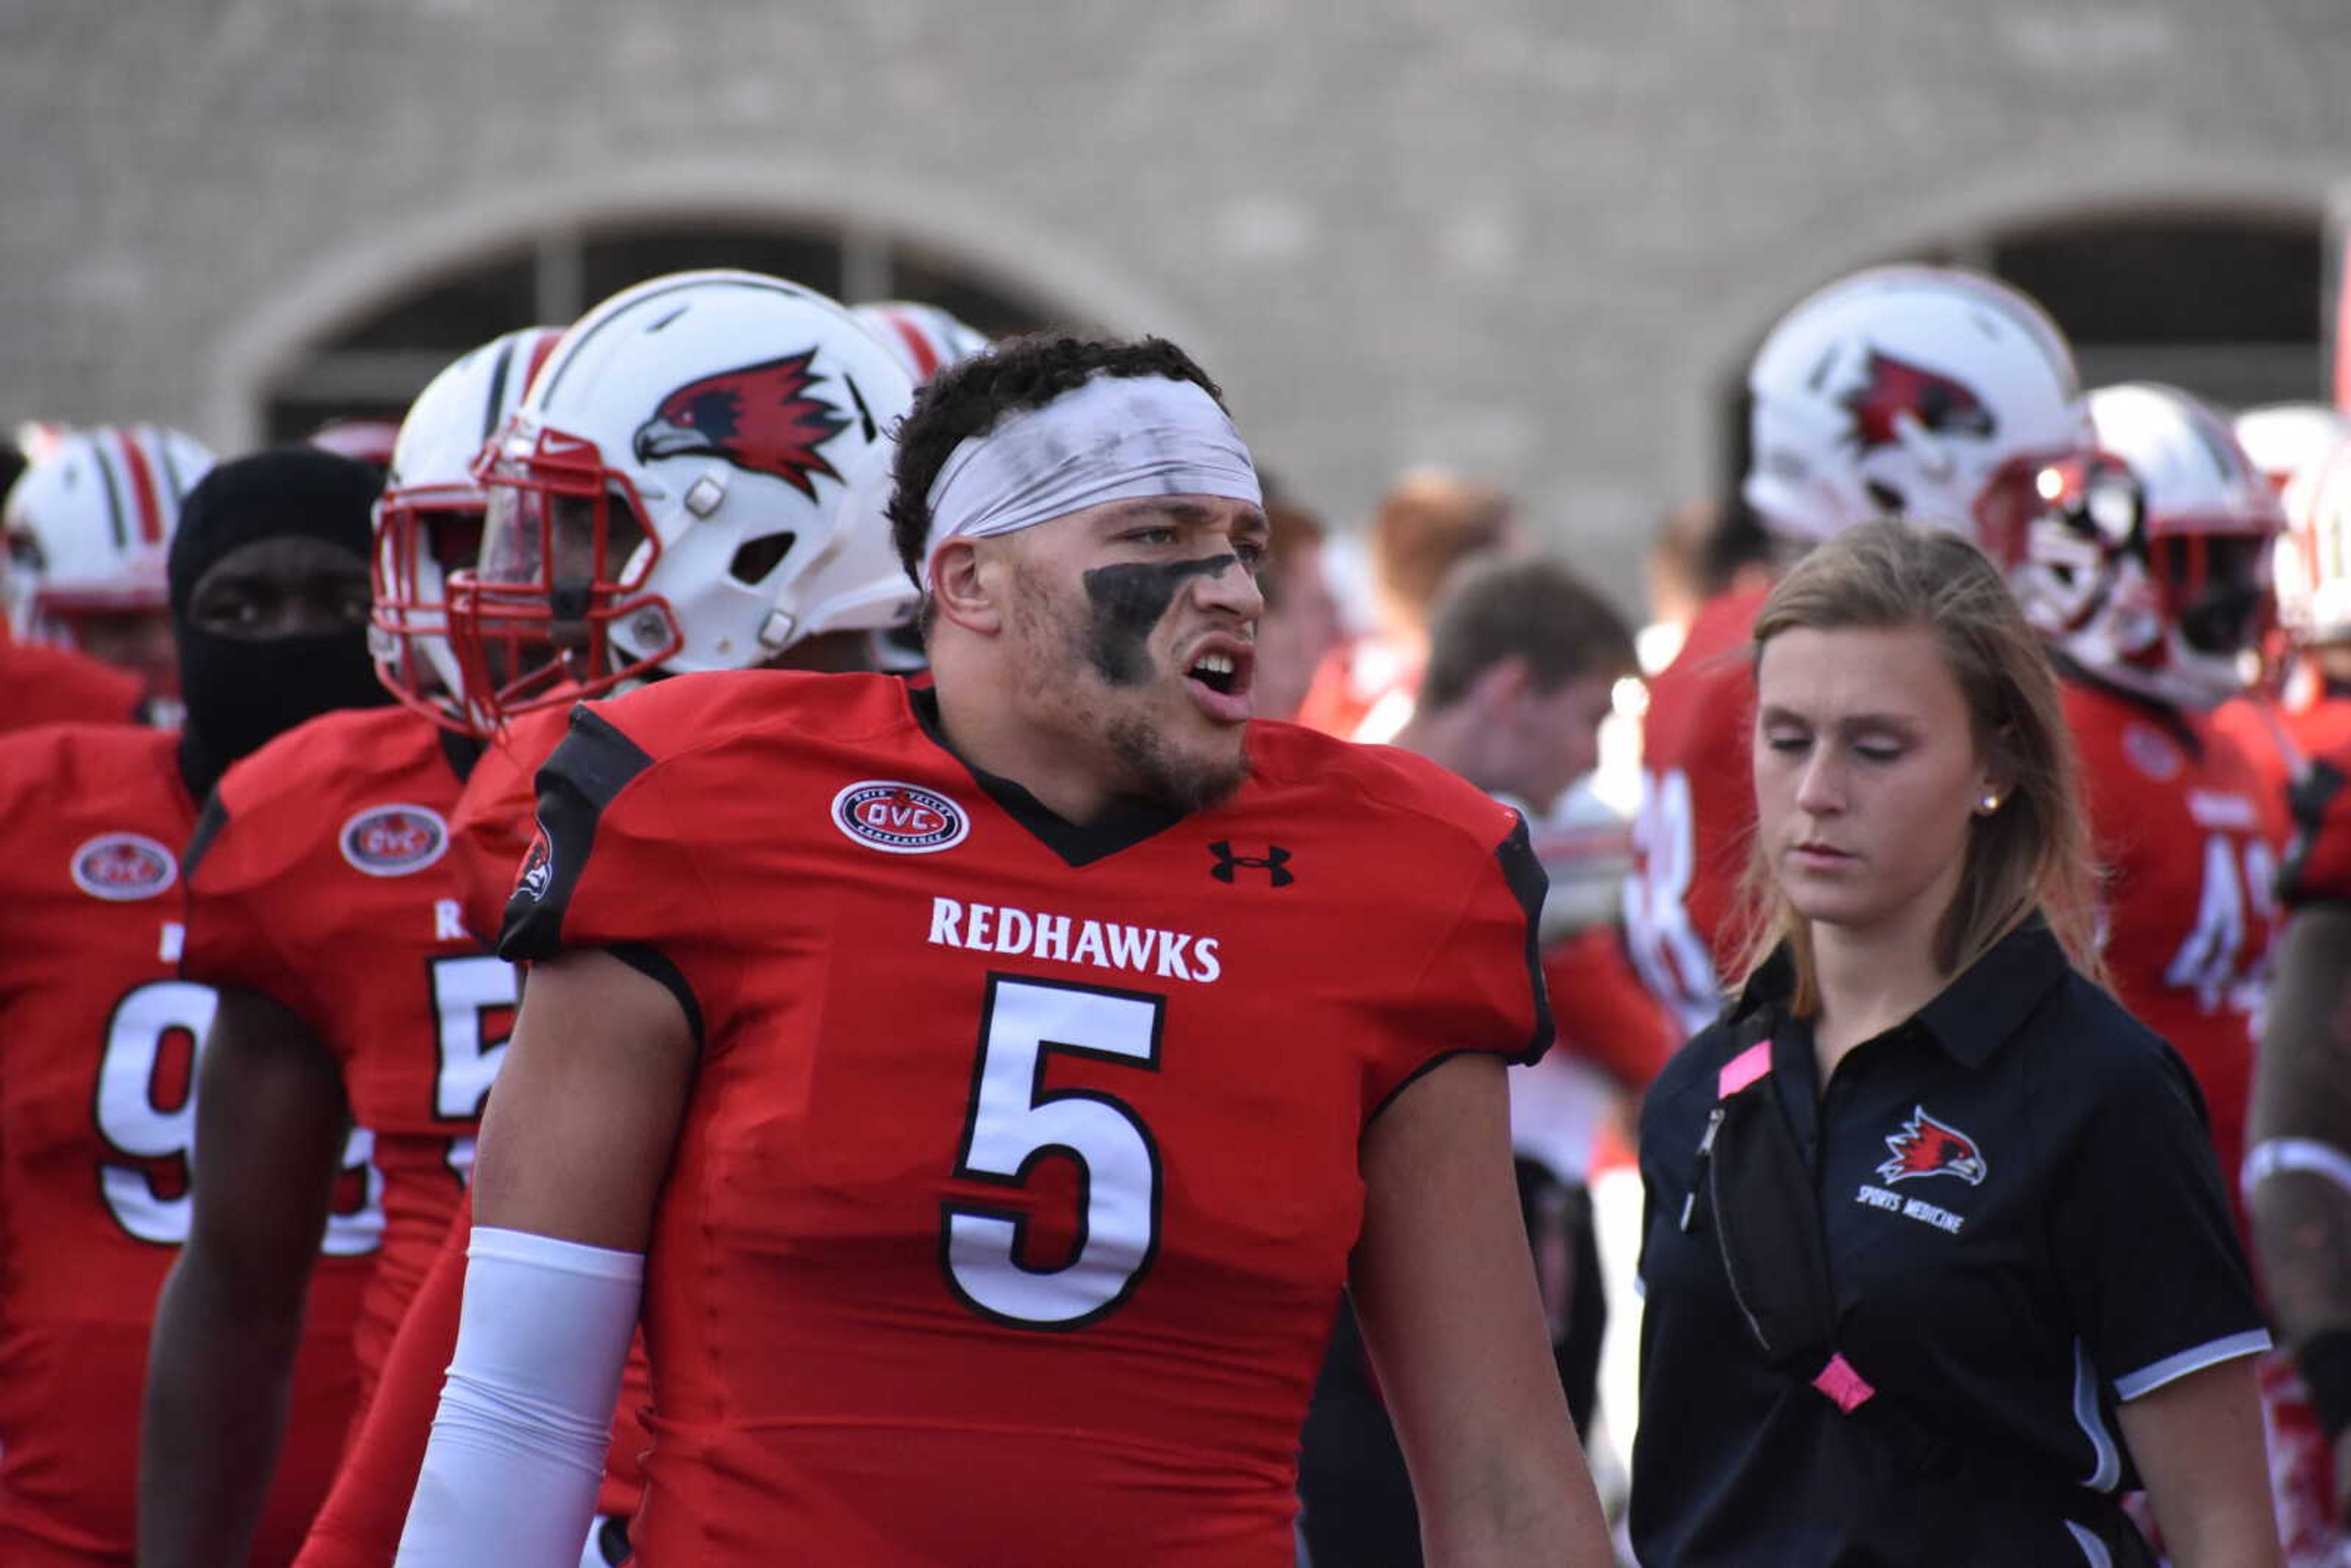 Junior inside linebacker Zach Hall helped lead the Redhawks into the playoffs, finished the regular season with 150 tackles—second-most in the FCS.